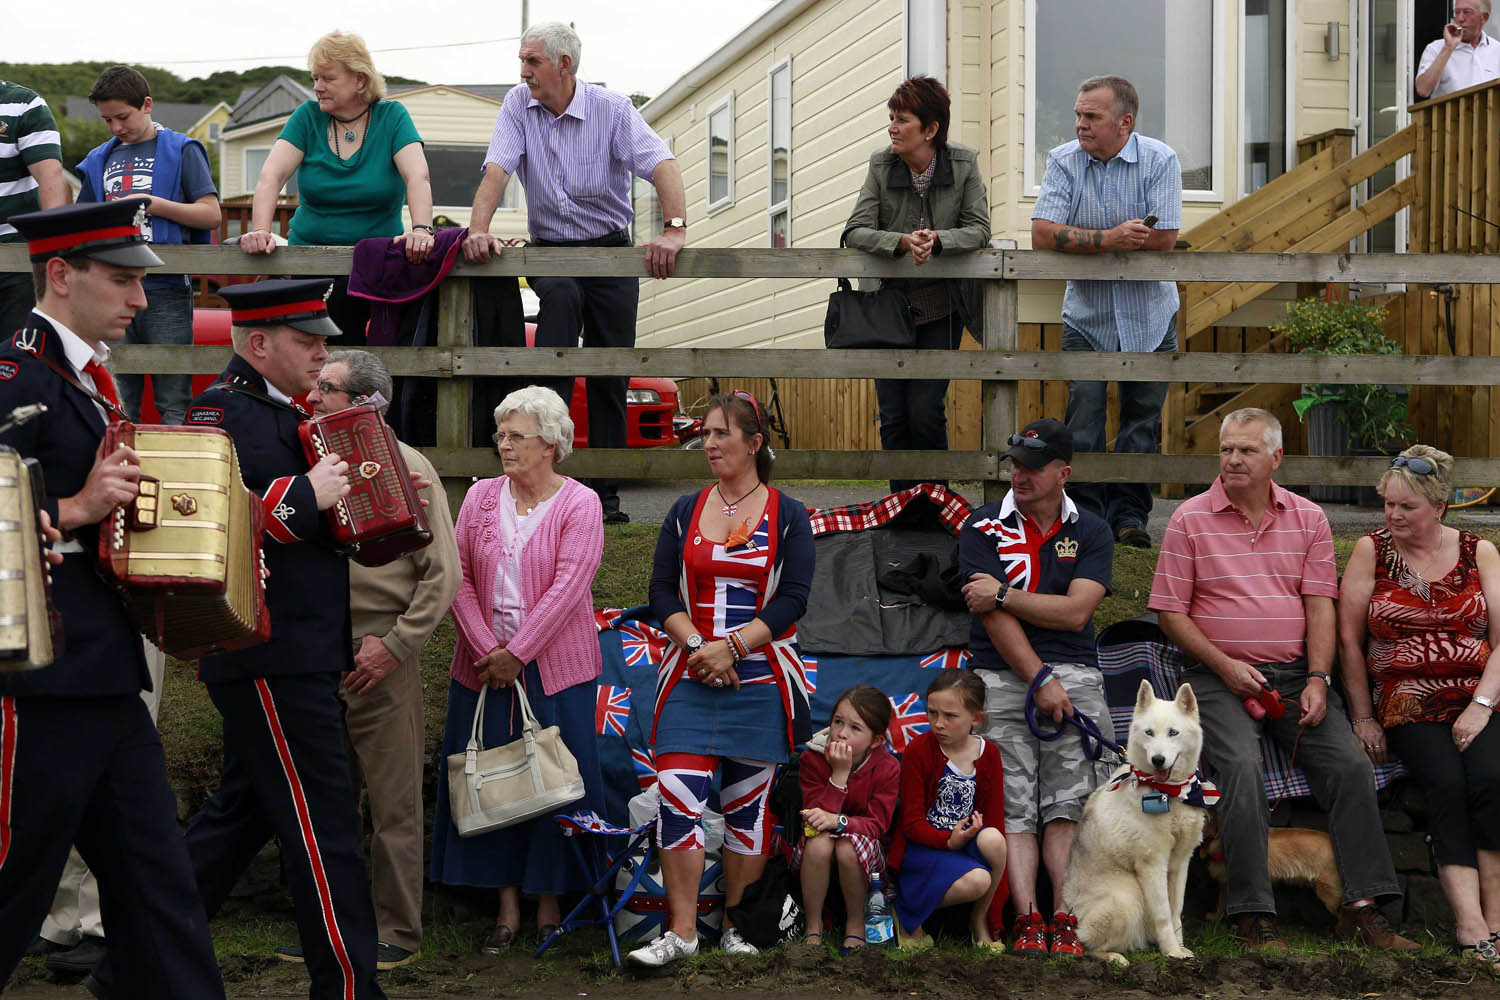 Spectators watch an Orange Order parade at Rossnowlagh Strand in County Donegal.